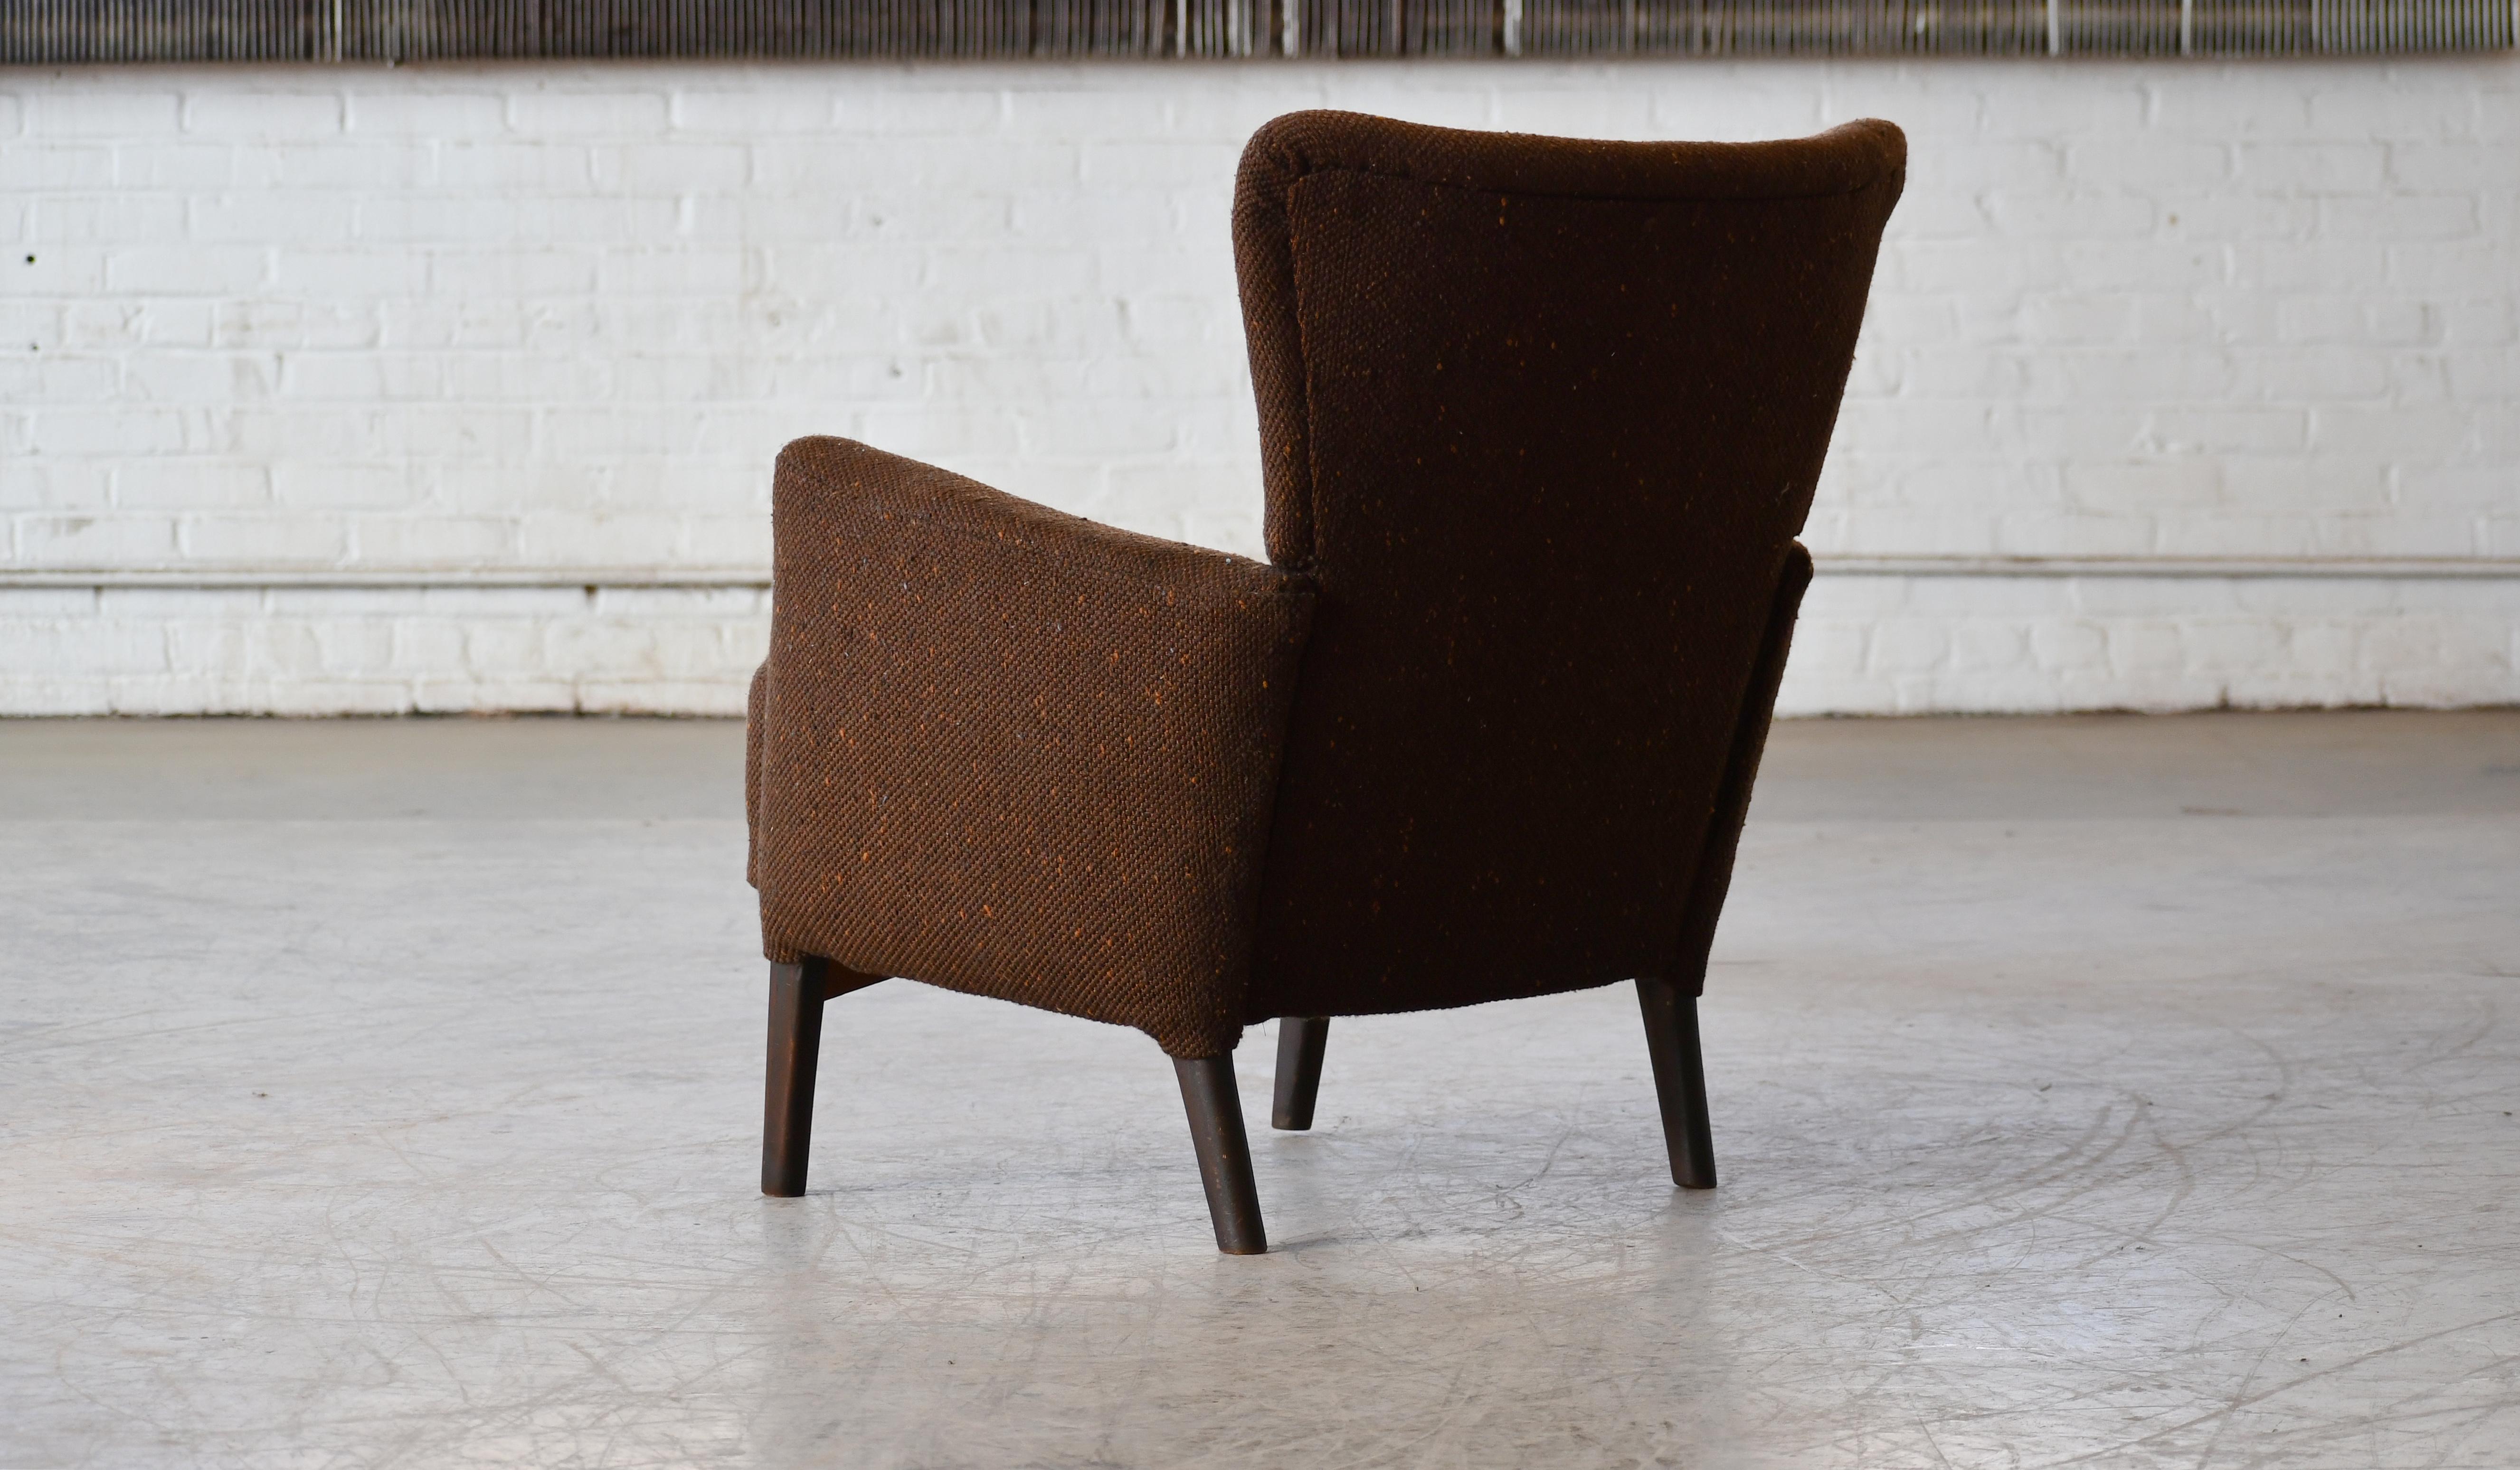 Mid-20th Century Low Back Lounge Chair by Fritz Hansen, Denmark 1950's